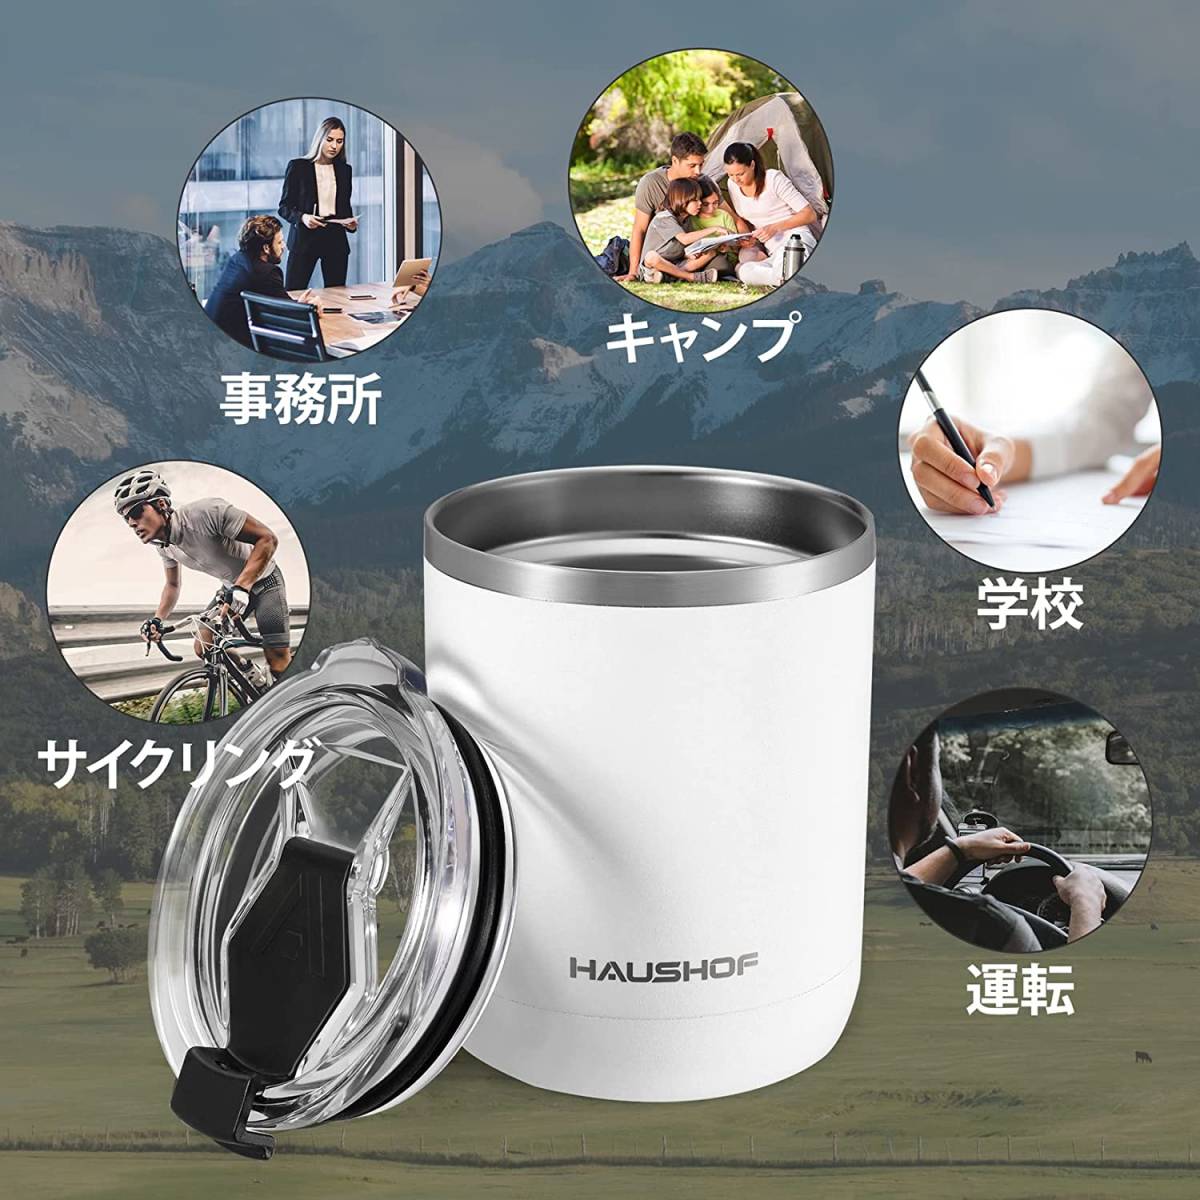 HAUSHOF vacuum insulation cup made of stainless steel cover attaching 300ml coffee cup flask mug bottle stainless steel glass convenience store ma